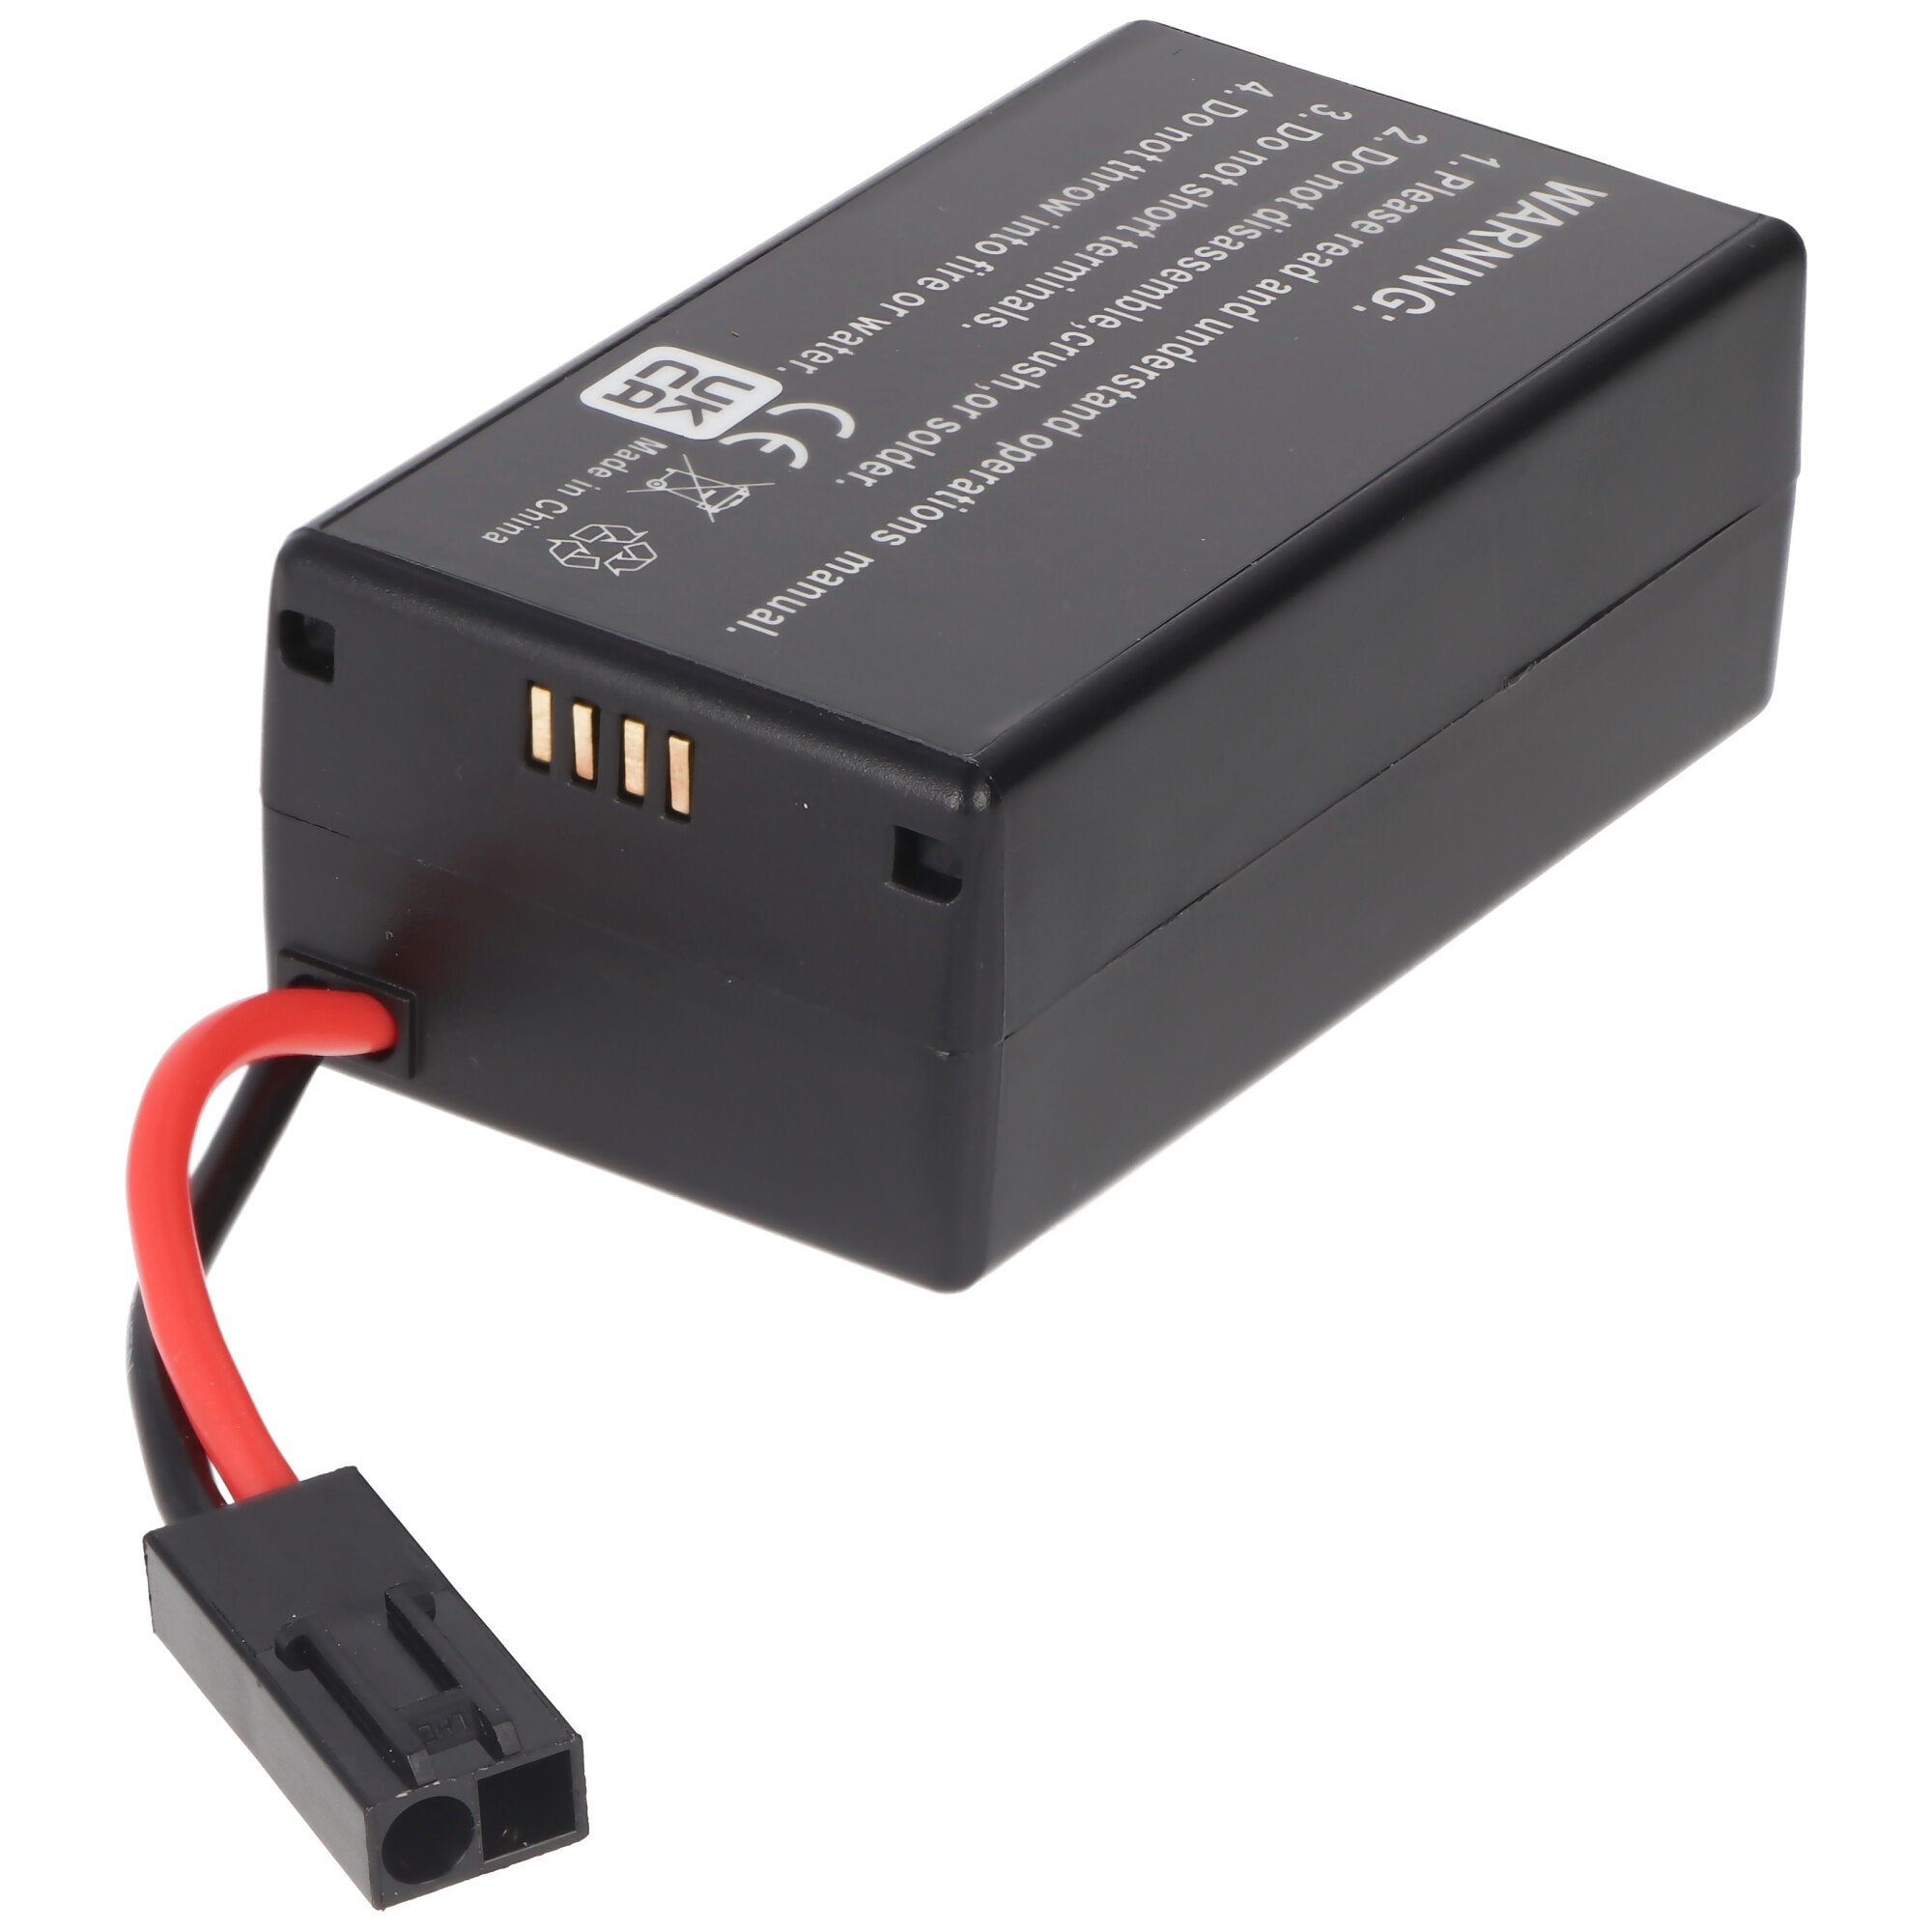 Battery for Parrot AR.Drone 2.0 and others 1500mAh